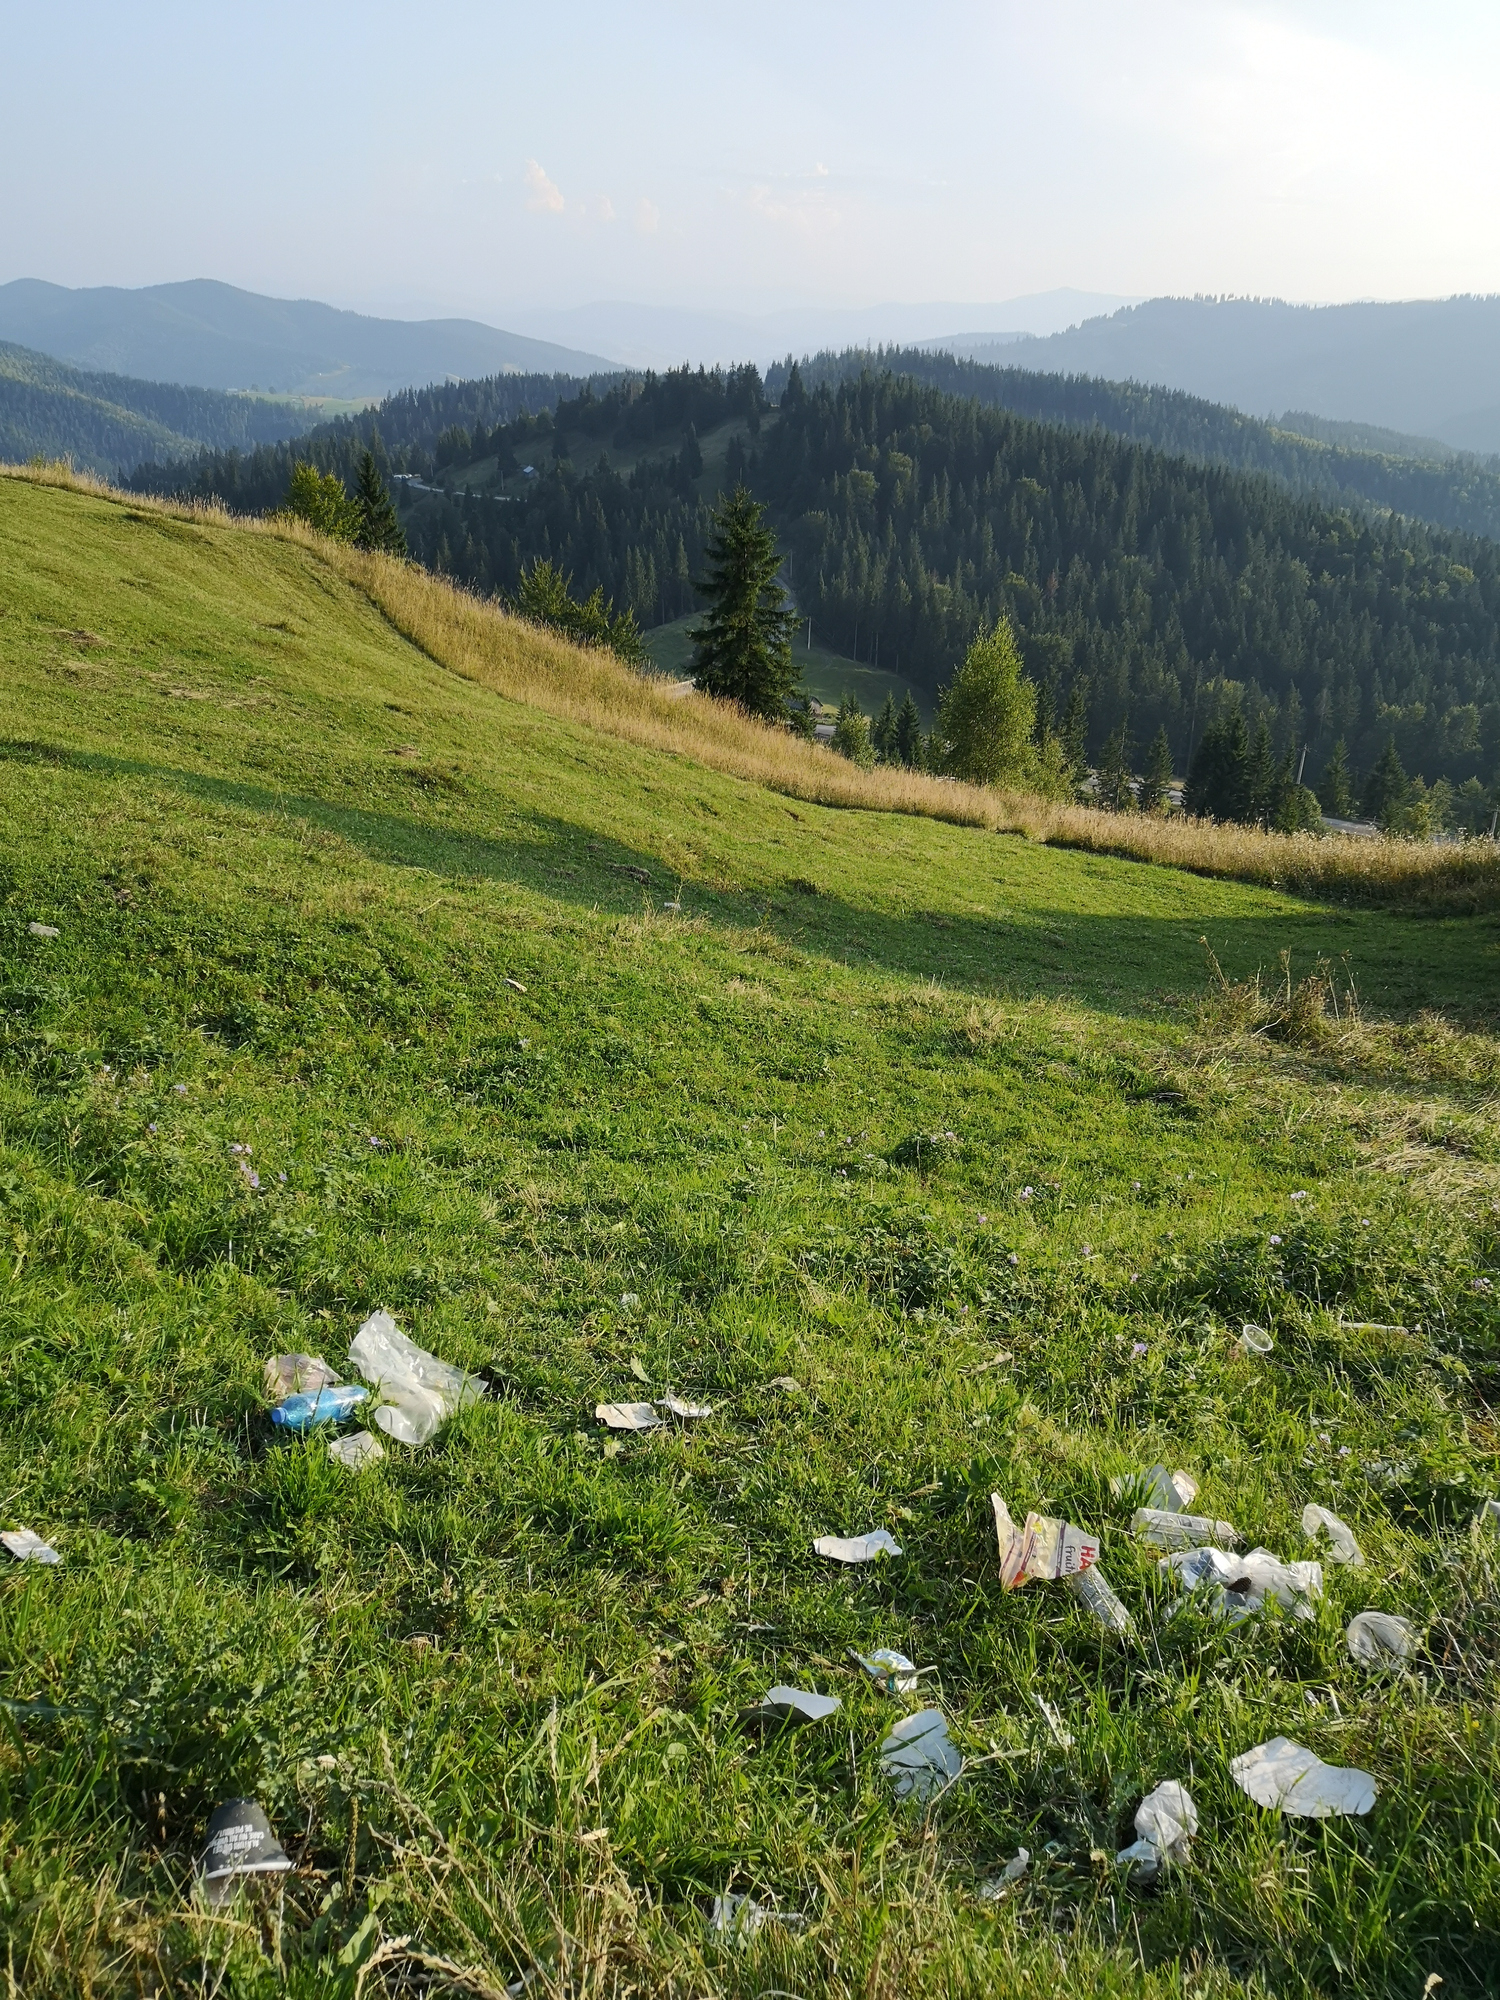 A grassy field with litter